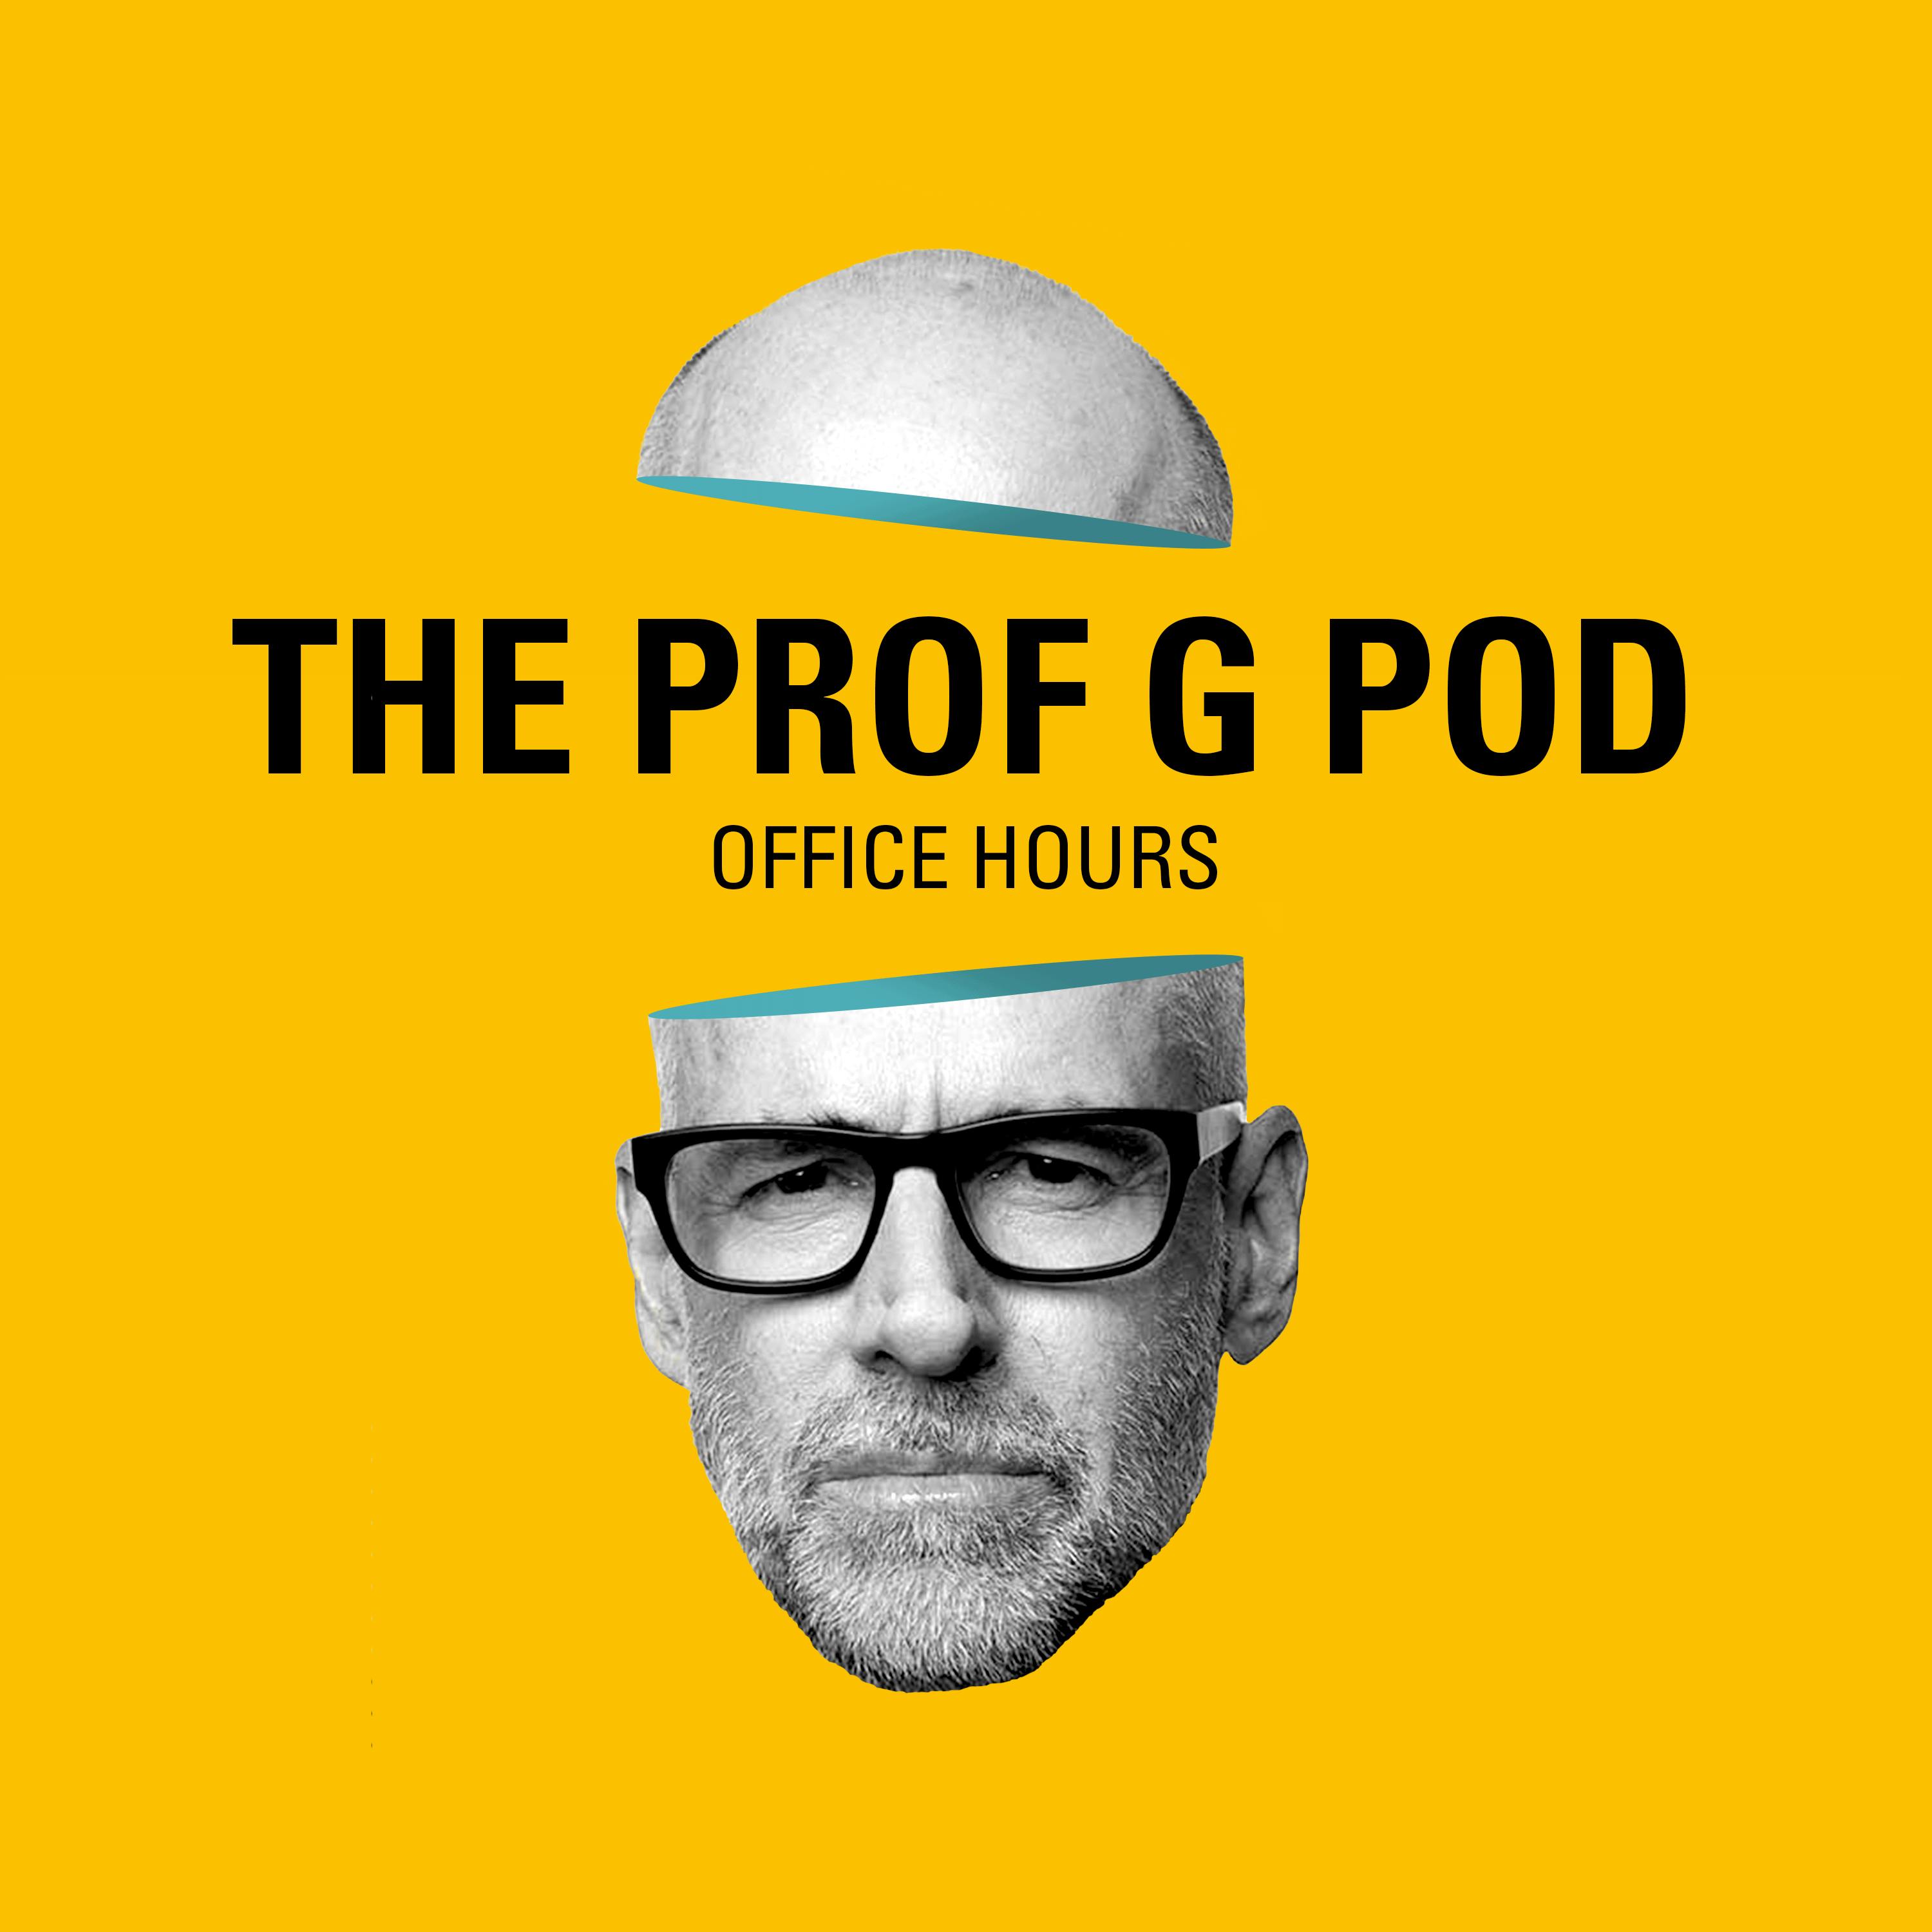 Office Hours: Web3 Unlocks, Podcast Subscriptions vs Ads, and Transitioning to a Smaller Company